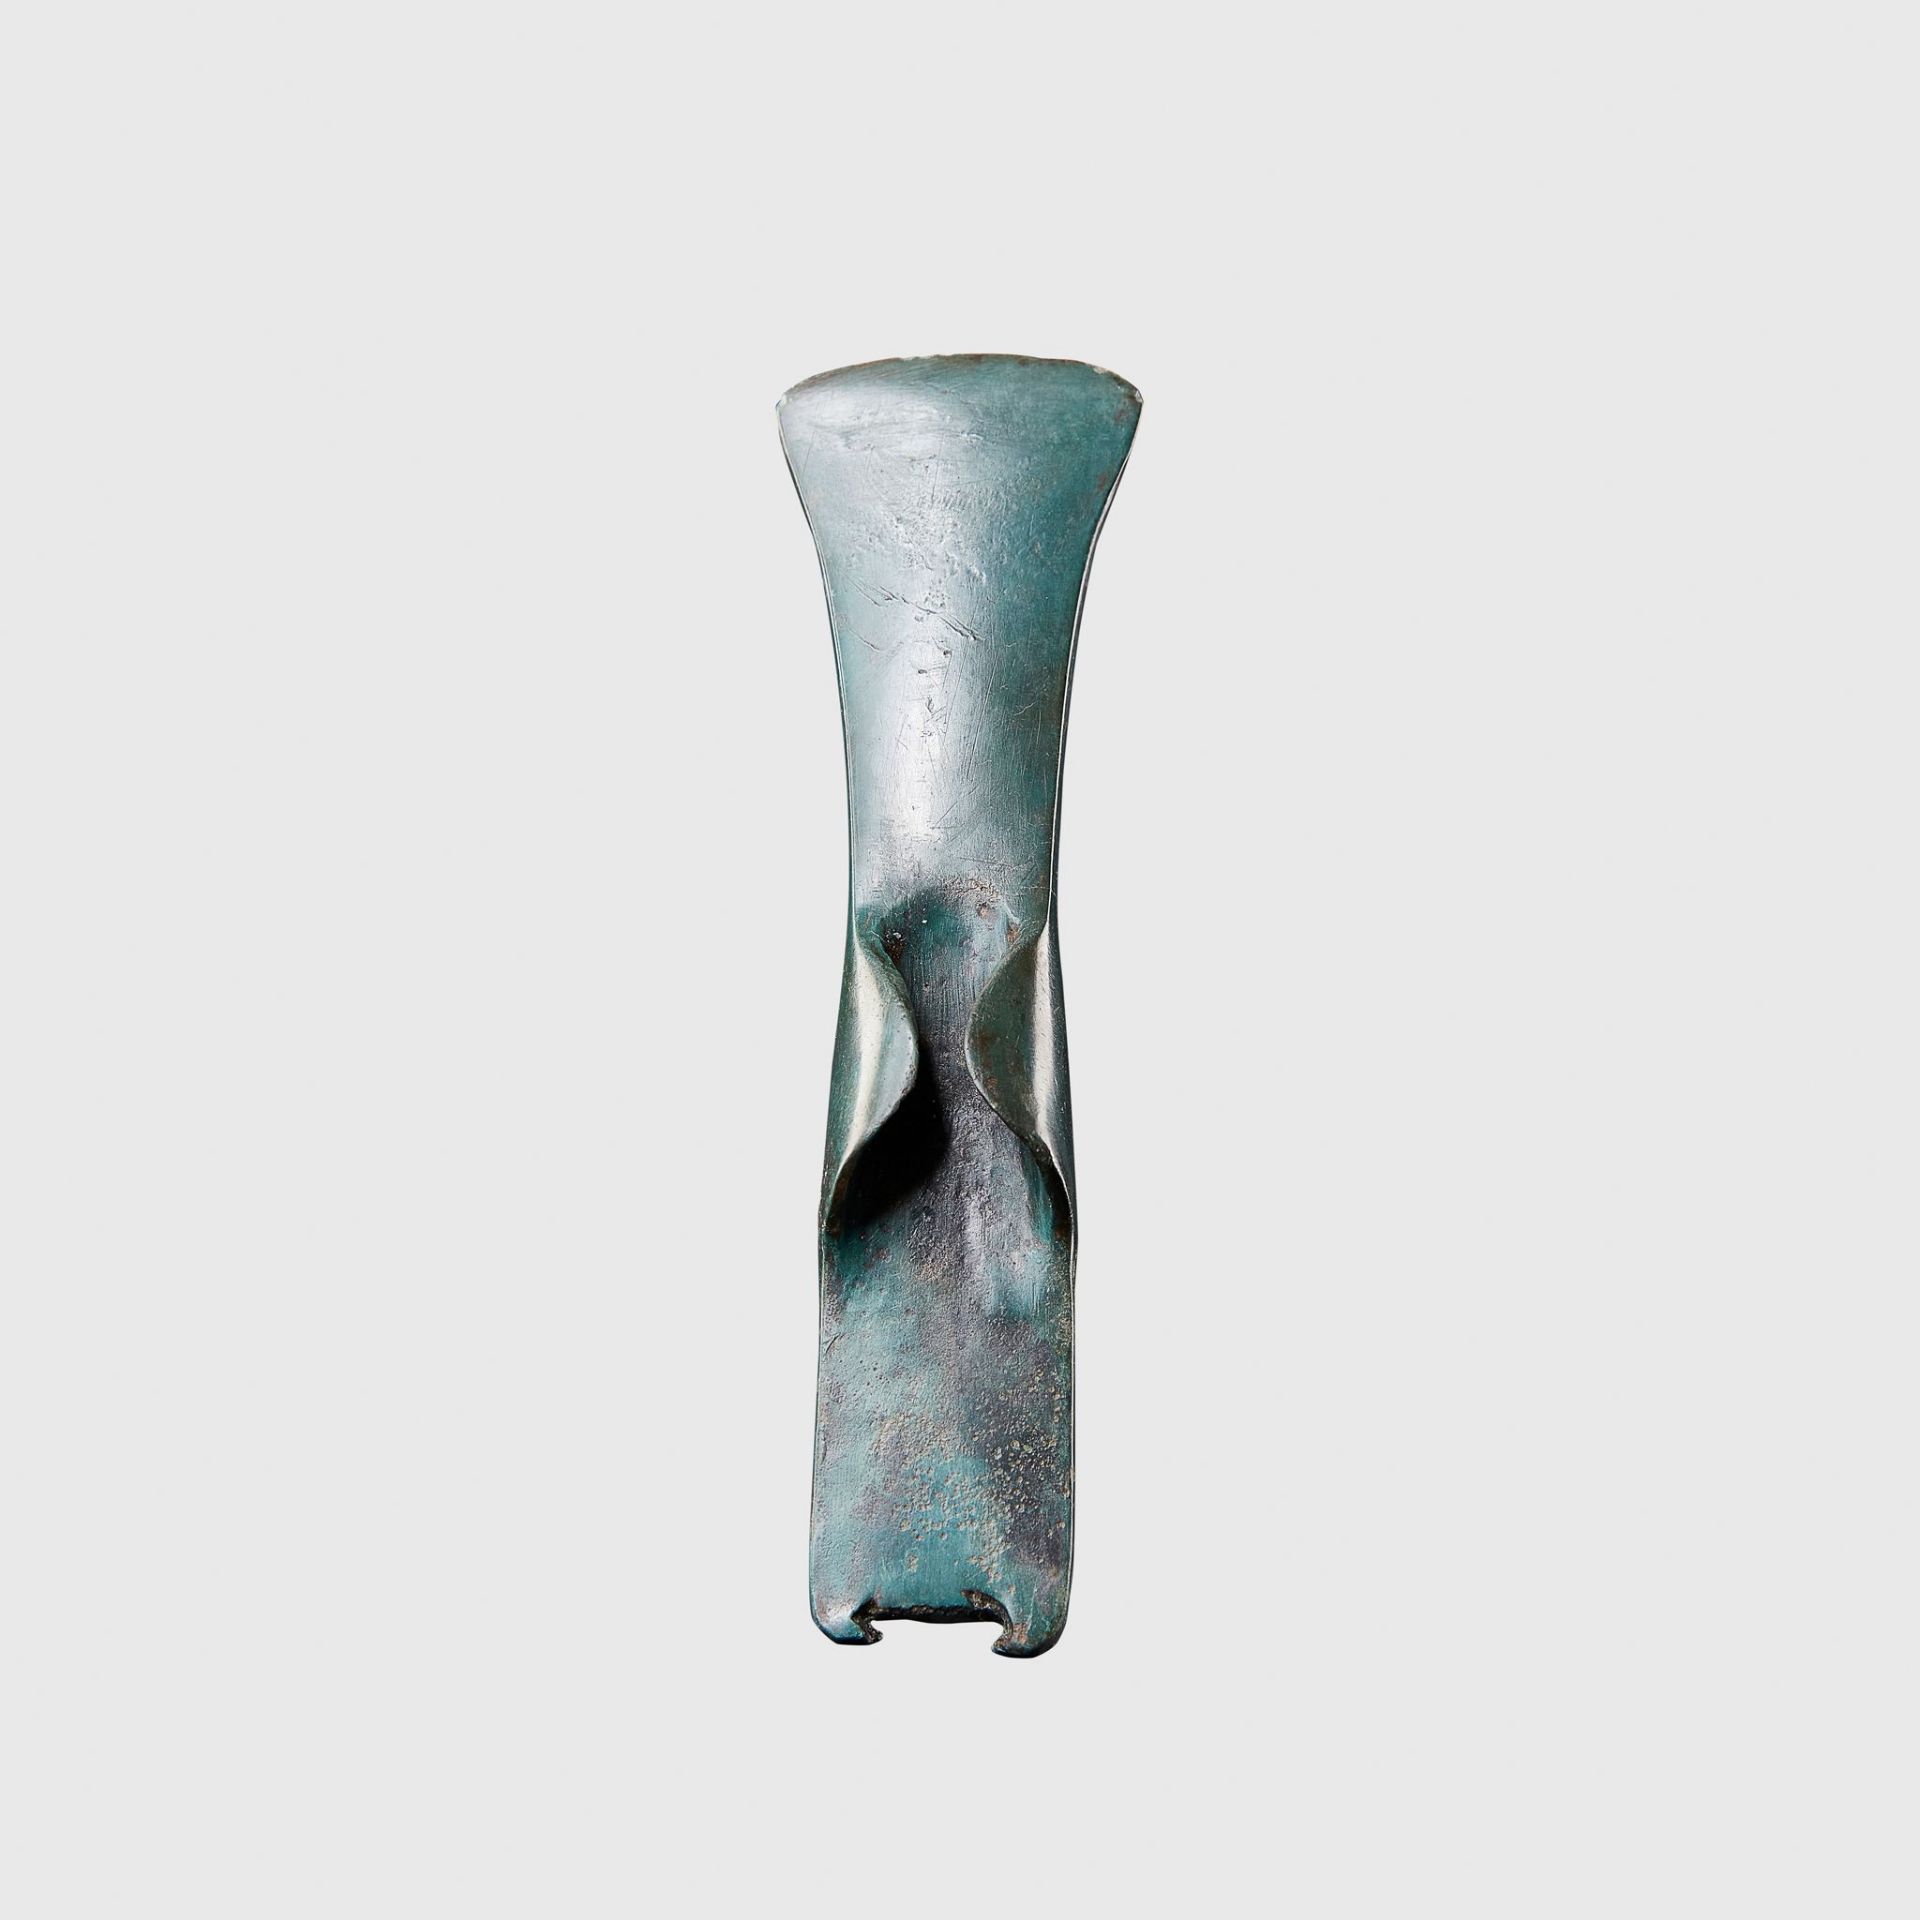 MIDDLE BRONZE AGE PALSTAVE AXE WESTERN EUROPE, C. 1200 B.C.